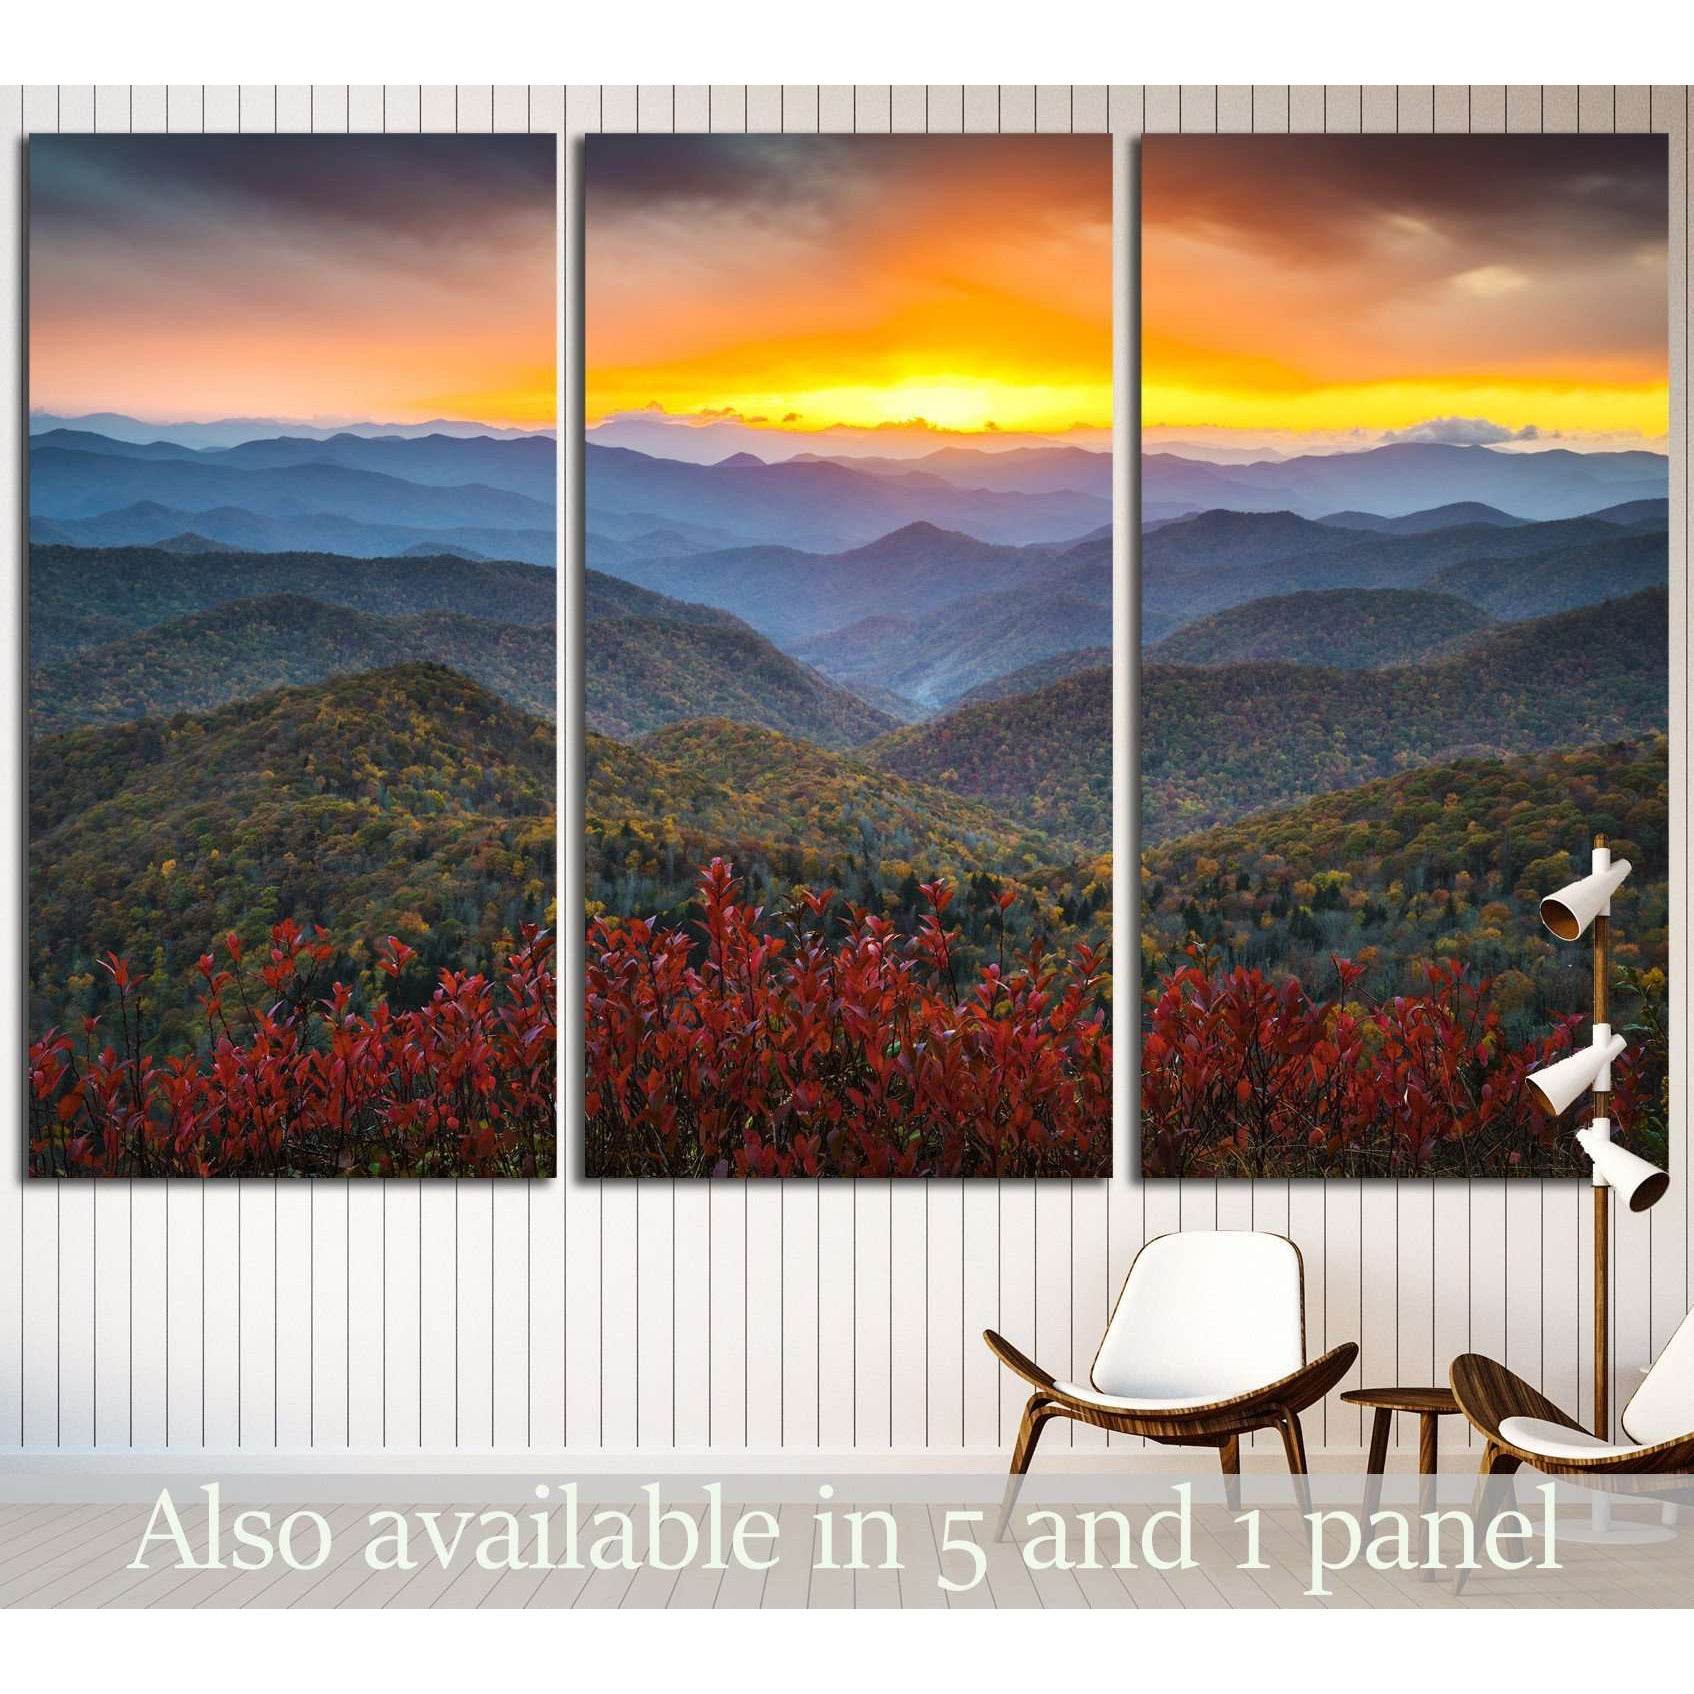 Autumn Sunset Over Mountains Canvas Print for Warm Home DecorThis canvas print portrays a vibrant autumnal sunset over a mountain range, with the warm colors of the foliage providing a stark contrast against the cool blues of the distant peaks, creating a